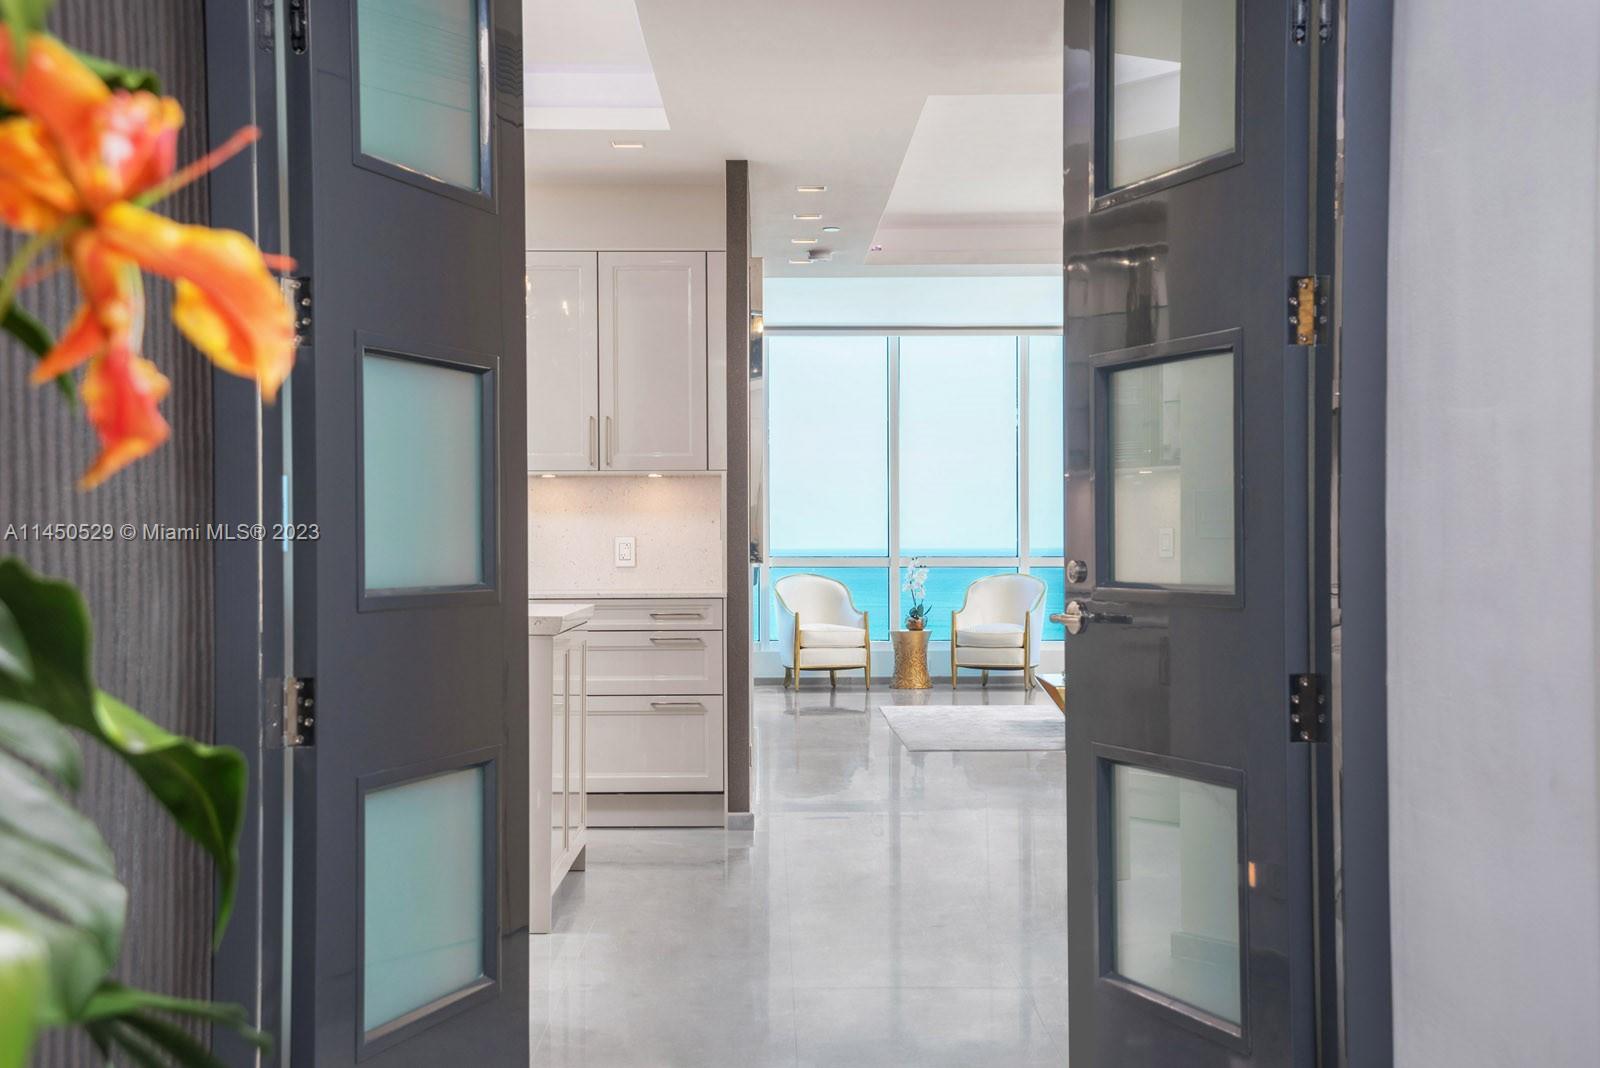 Designer decorated and custom tailored w/the most luxurious finishes. The moment you enter this spectacular and desirable 06-line residence from your private elevator foyer w/double door entry you will be amazed by the breathtaking Ocean View along the entire Beach. This exclusive residence went through years of extensive renovation and features only the finest and best materials/ finishes. Very scarce Italian light grey marble floors w/special effects, Siematic German kitchen w/Miele + Subzero appliances, Porsche Design lighting, Piano lacquered doors, cinema rated wall insulation, Cavalli Wall paper, Neff closets, Dornbracht fixtures, no expenses have been spared +just to mention a few of this completely upgraded Residence. List w/upgrades available! Hardly lived in, like new! Converted!